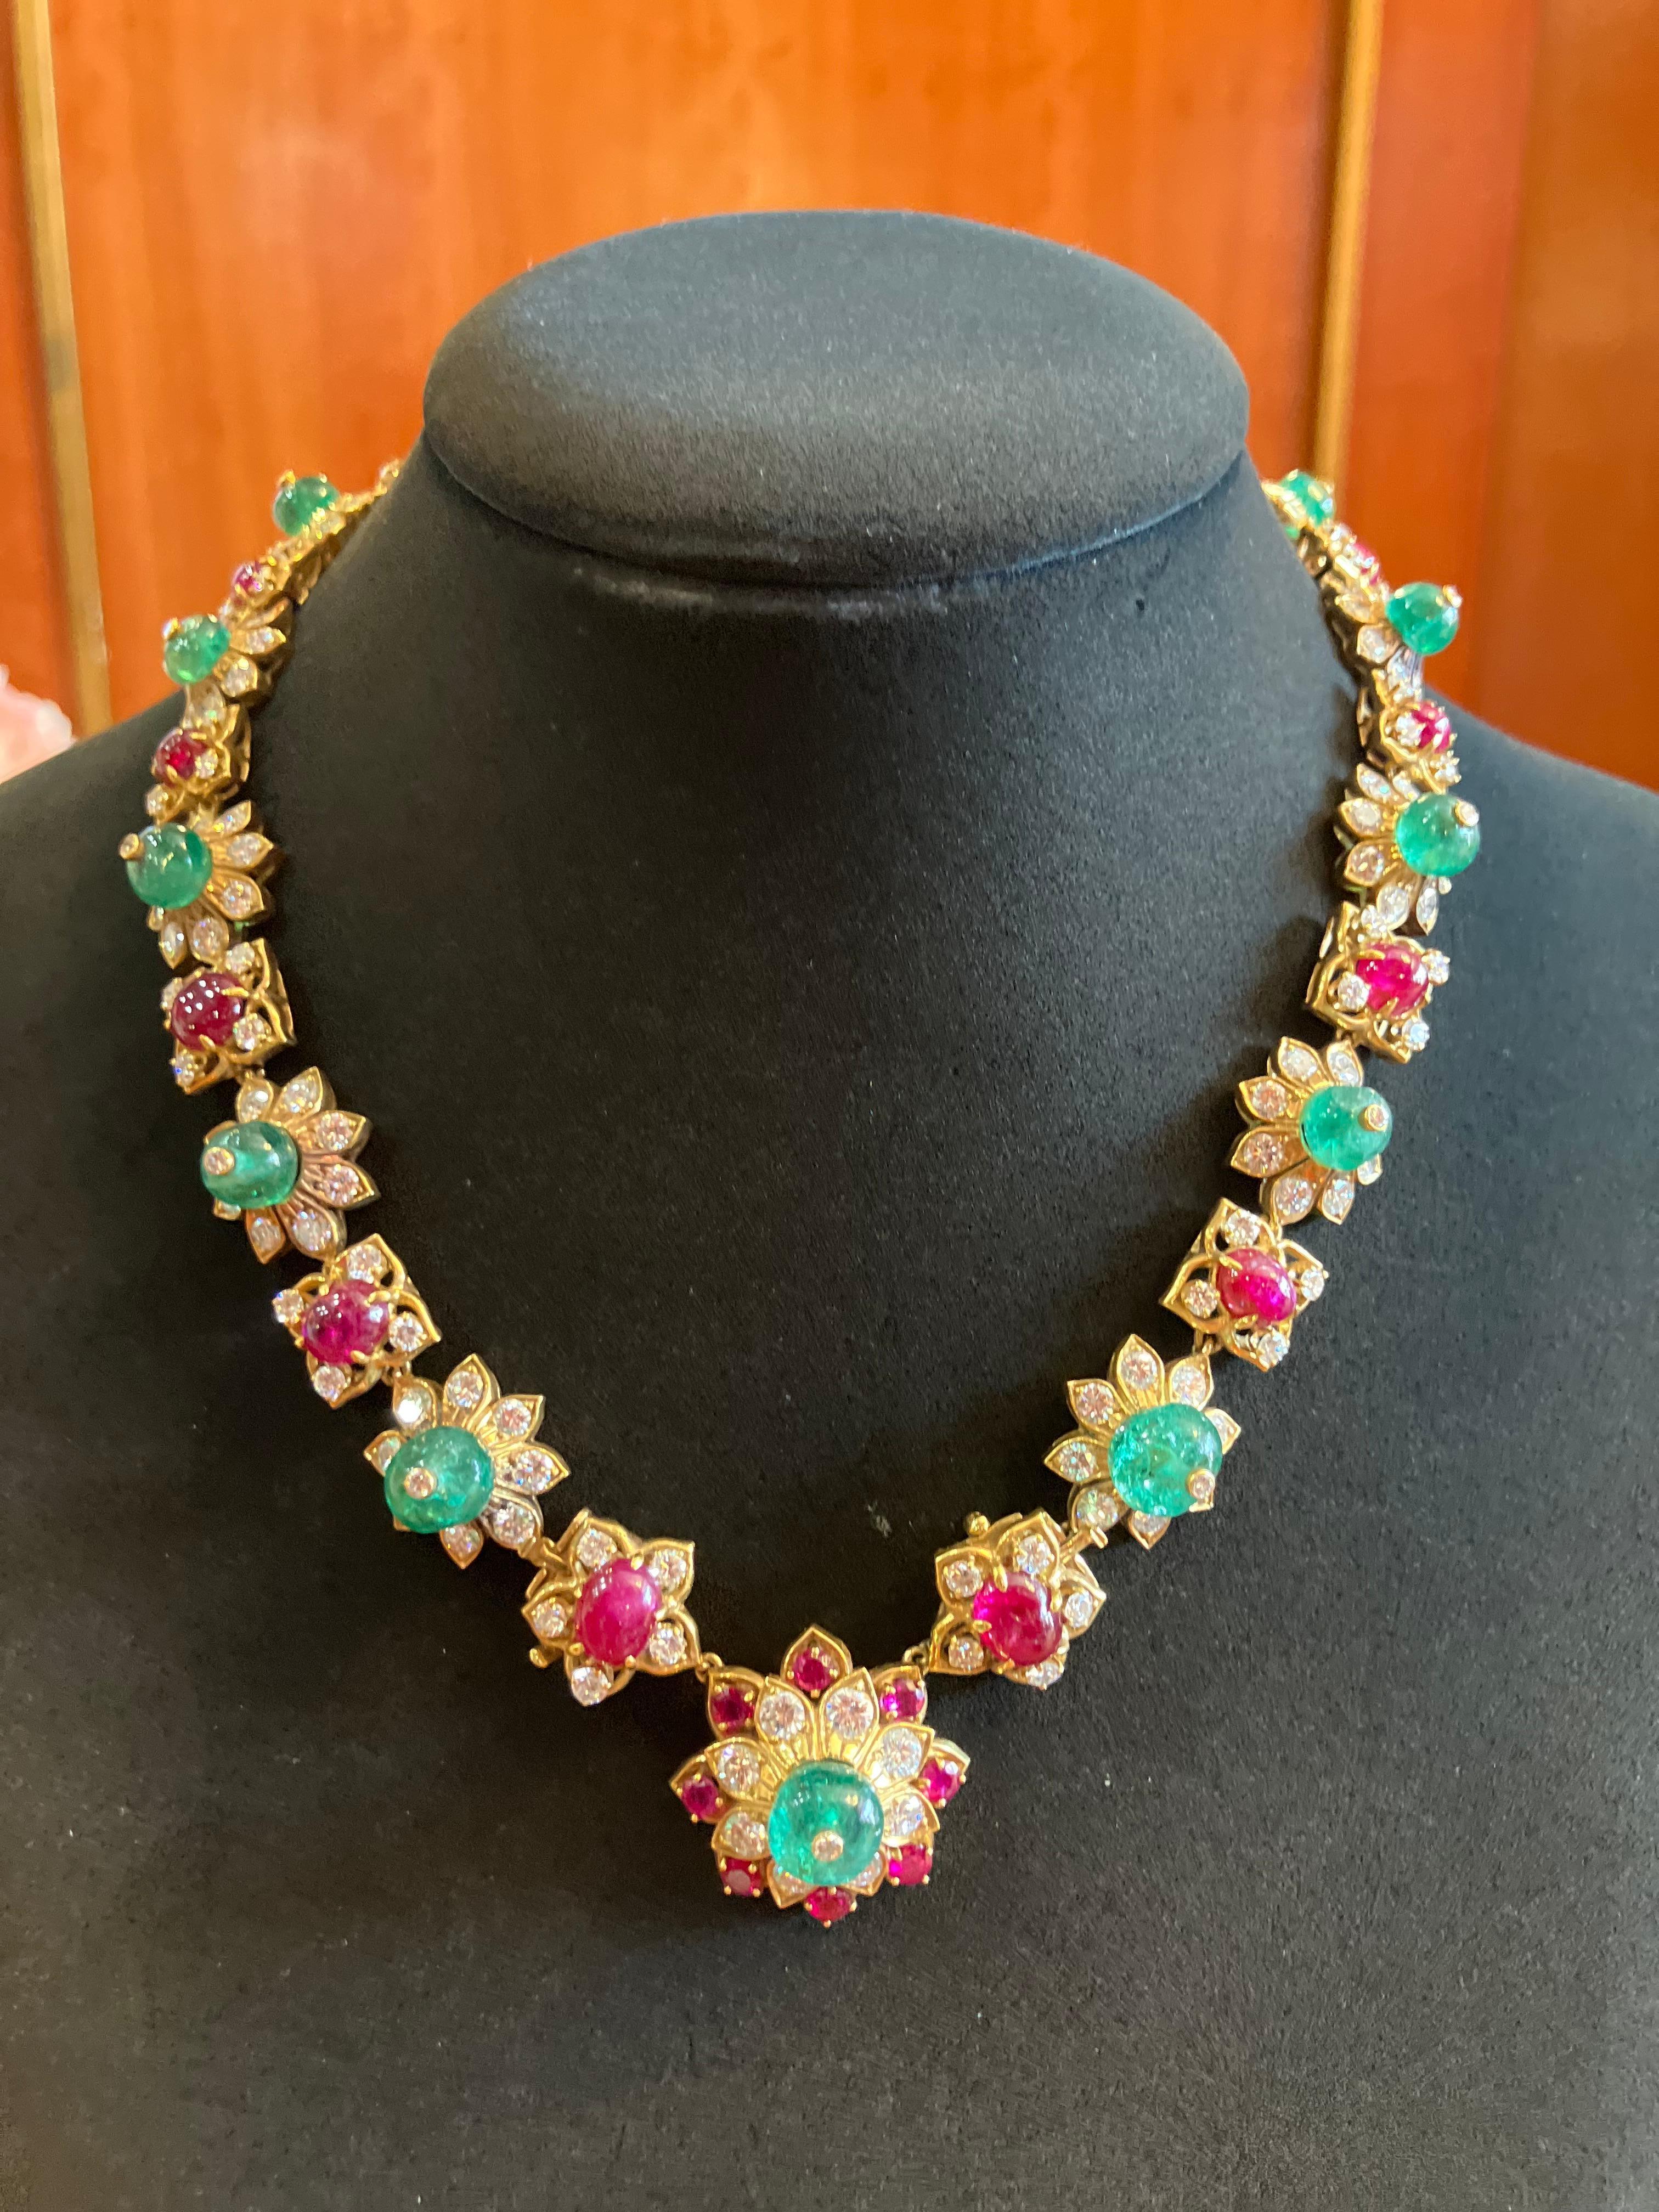 Magnificent Multi Color Van Cleef & Arpels Necklace Bracelet and Pendant Combination.  

-!5 Cabochon-Cut Rubies approximately 15 Ct. 
-15 Emerald Beads 44 Ct.
- Aprox. 197 Diamonds 15 Ct.

*Price is only for 1stDibs Collaboration

